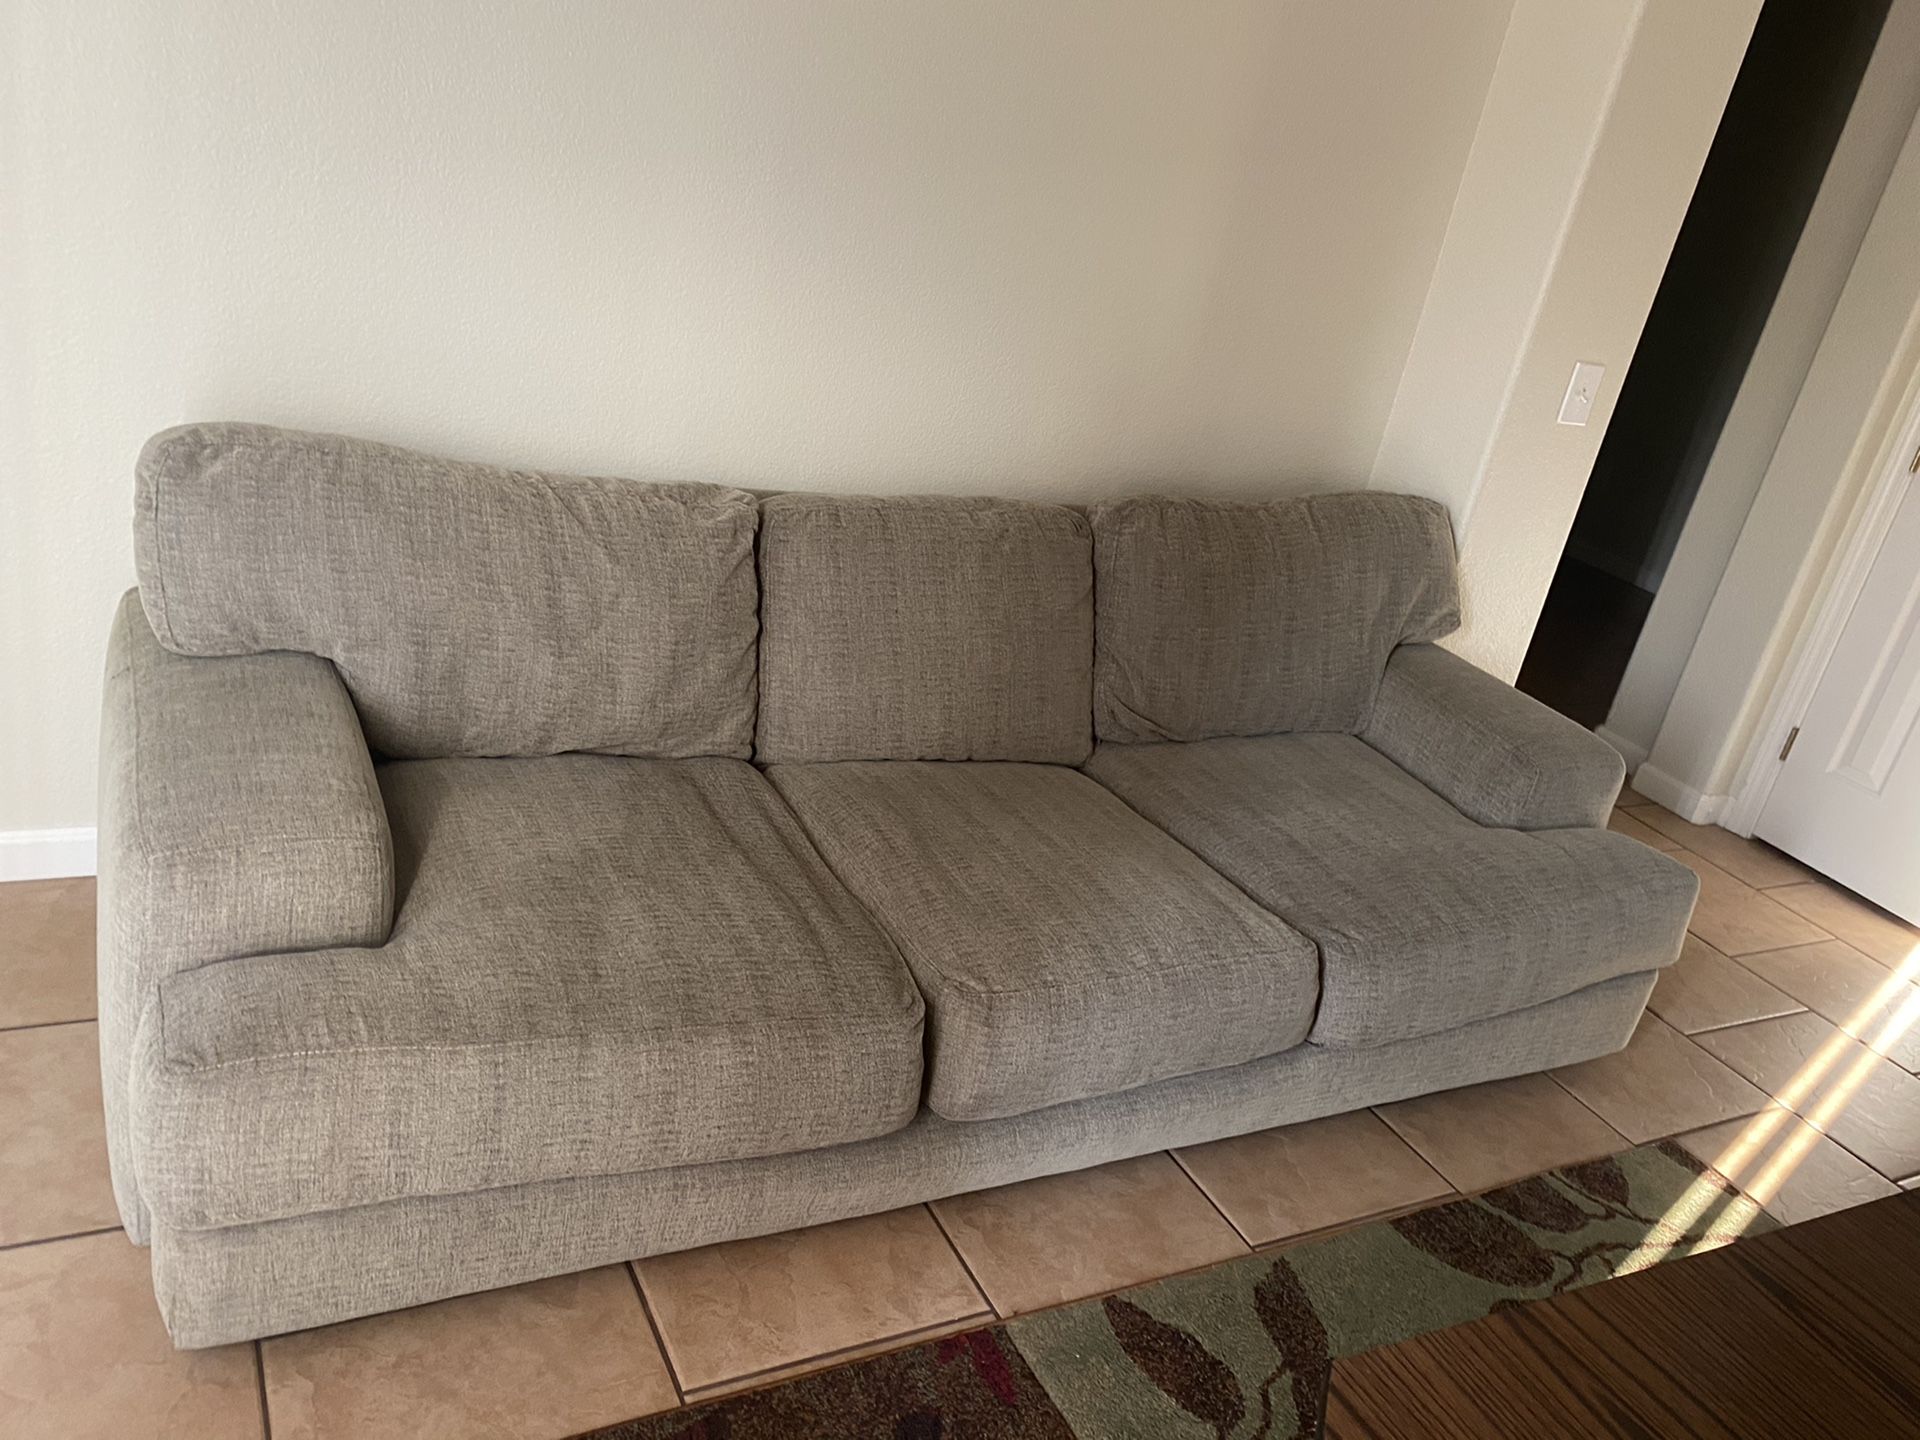 Couch for Sale for $100